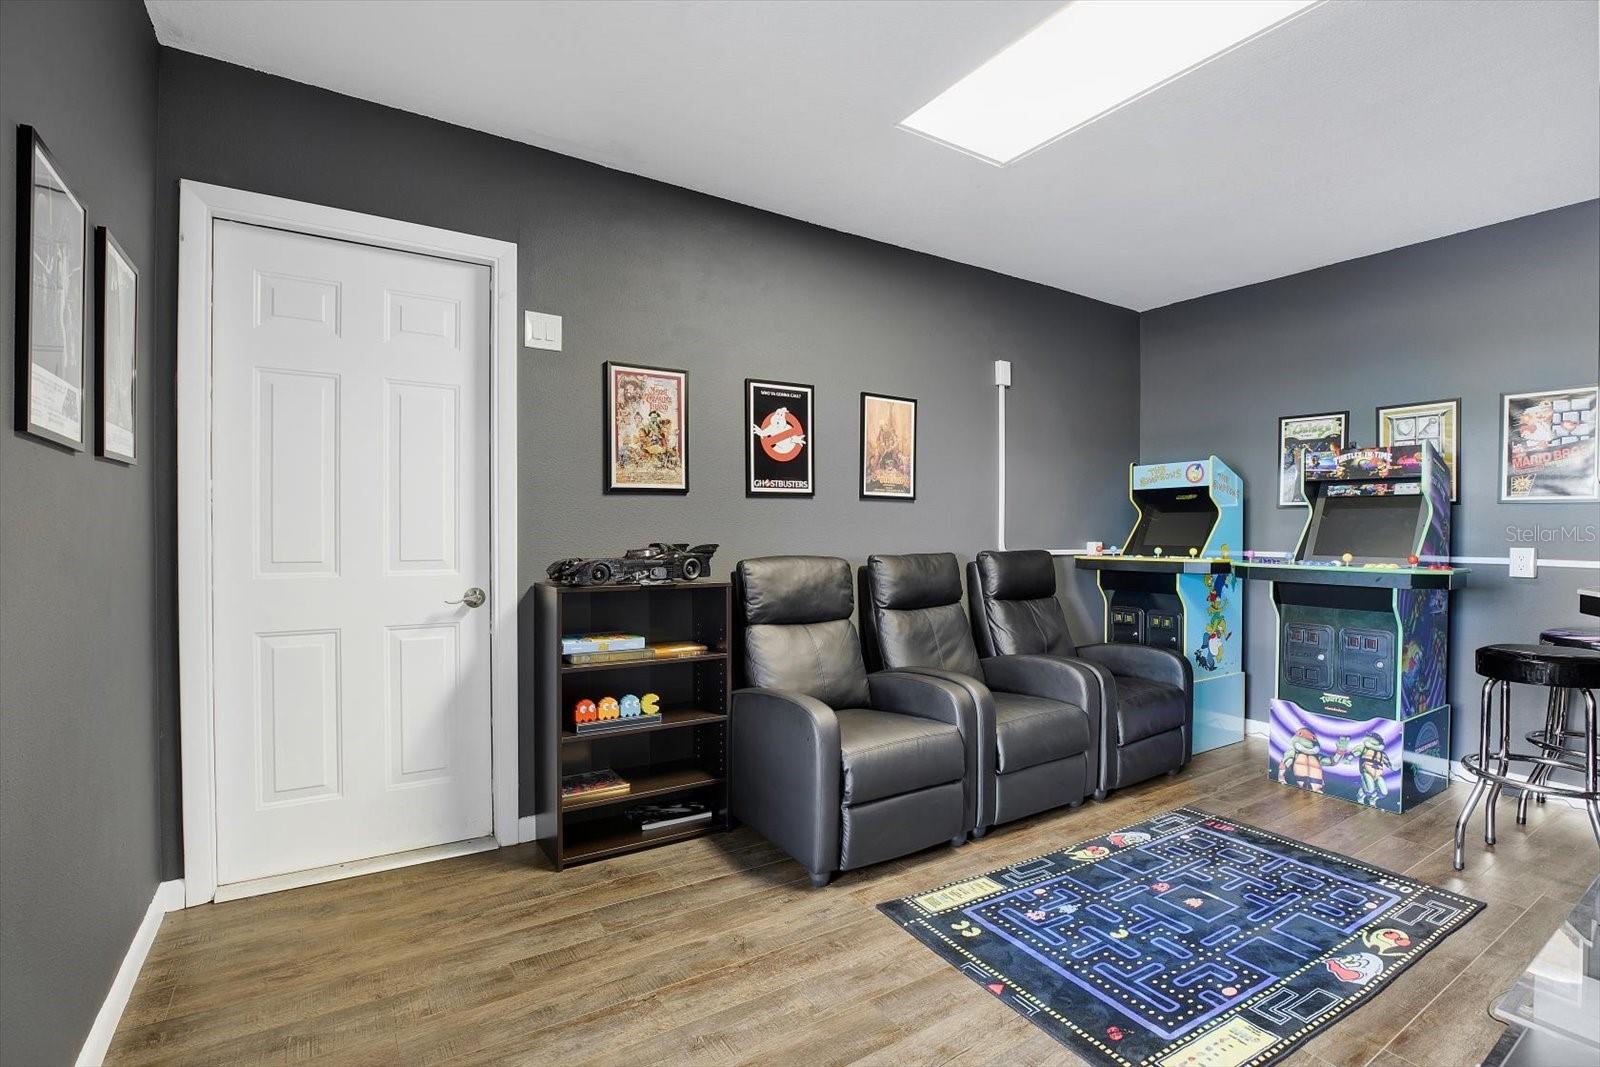 A separate game room could be used as a 5th bedroom, media room or home gym